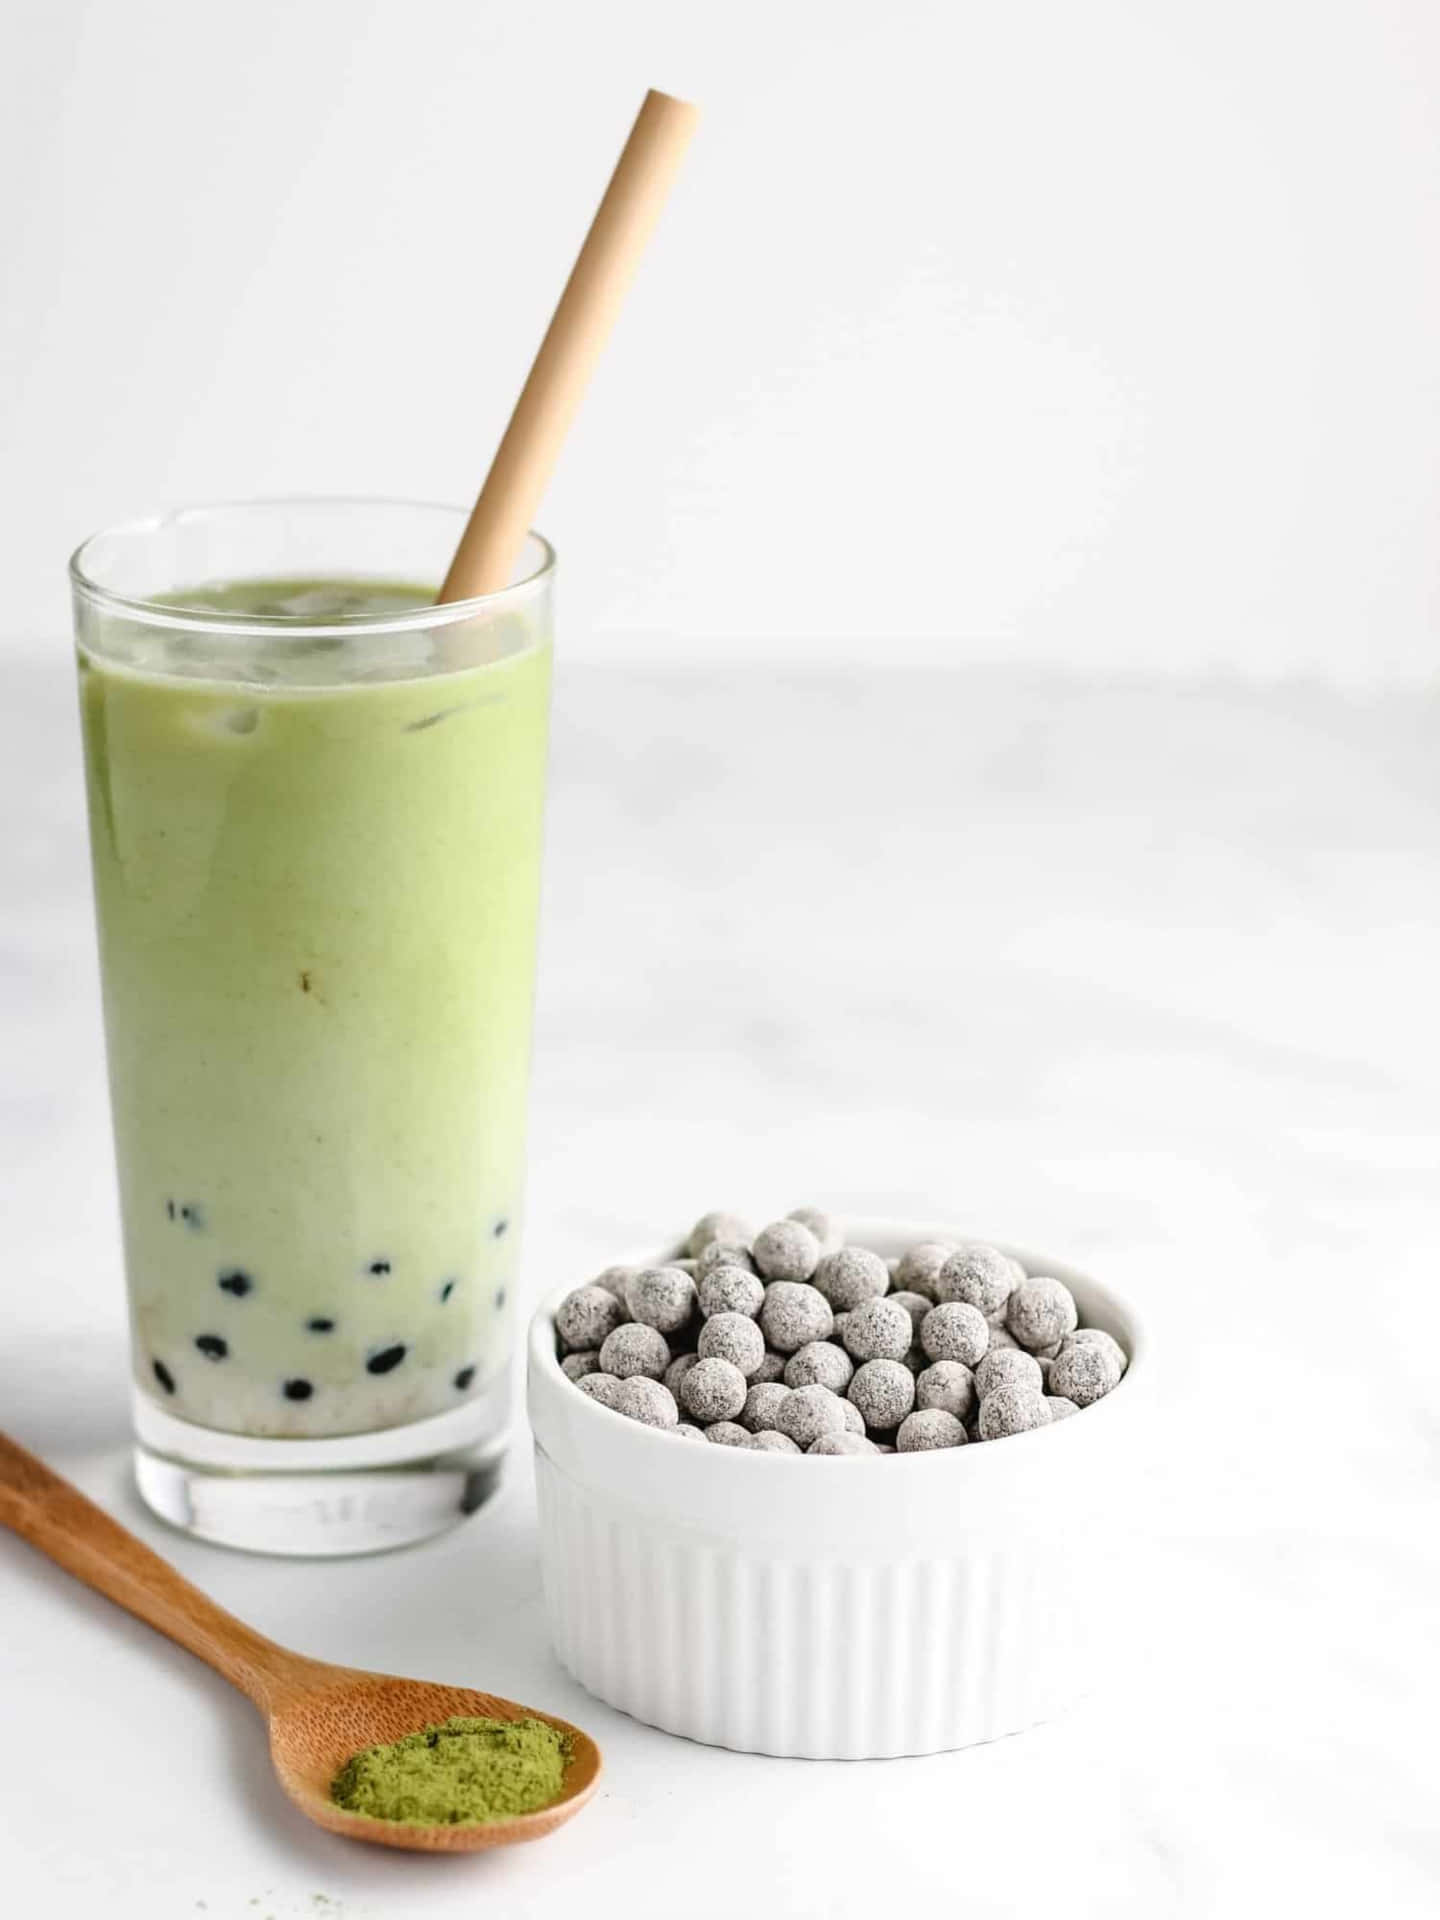 Get your Boba Tea fix with this delicious cup